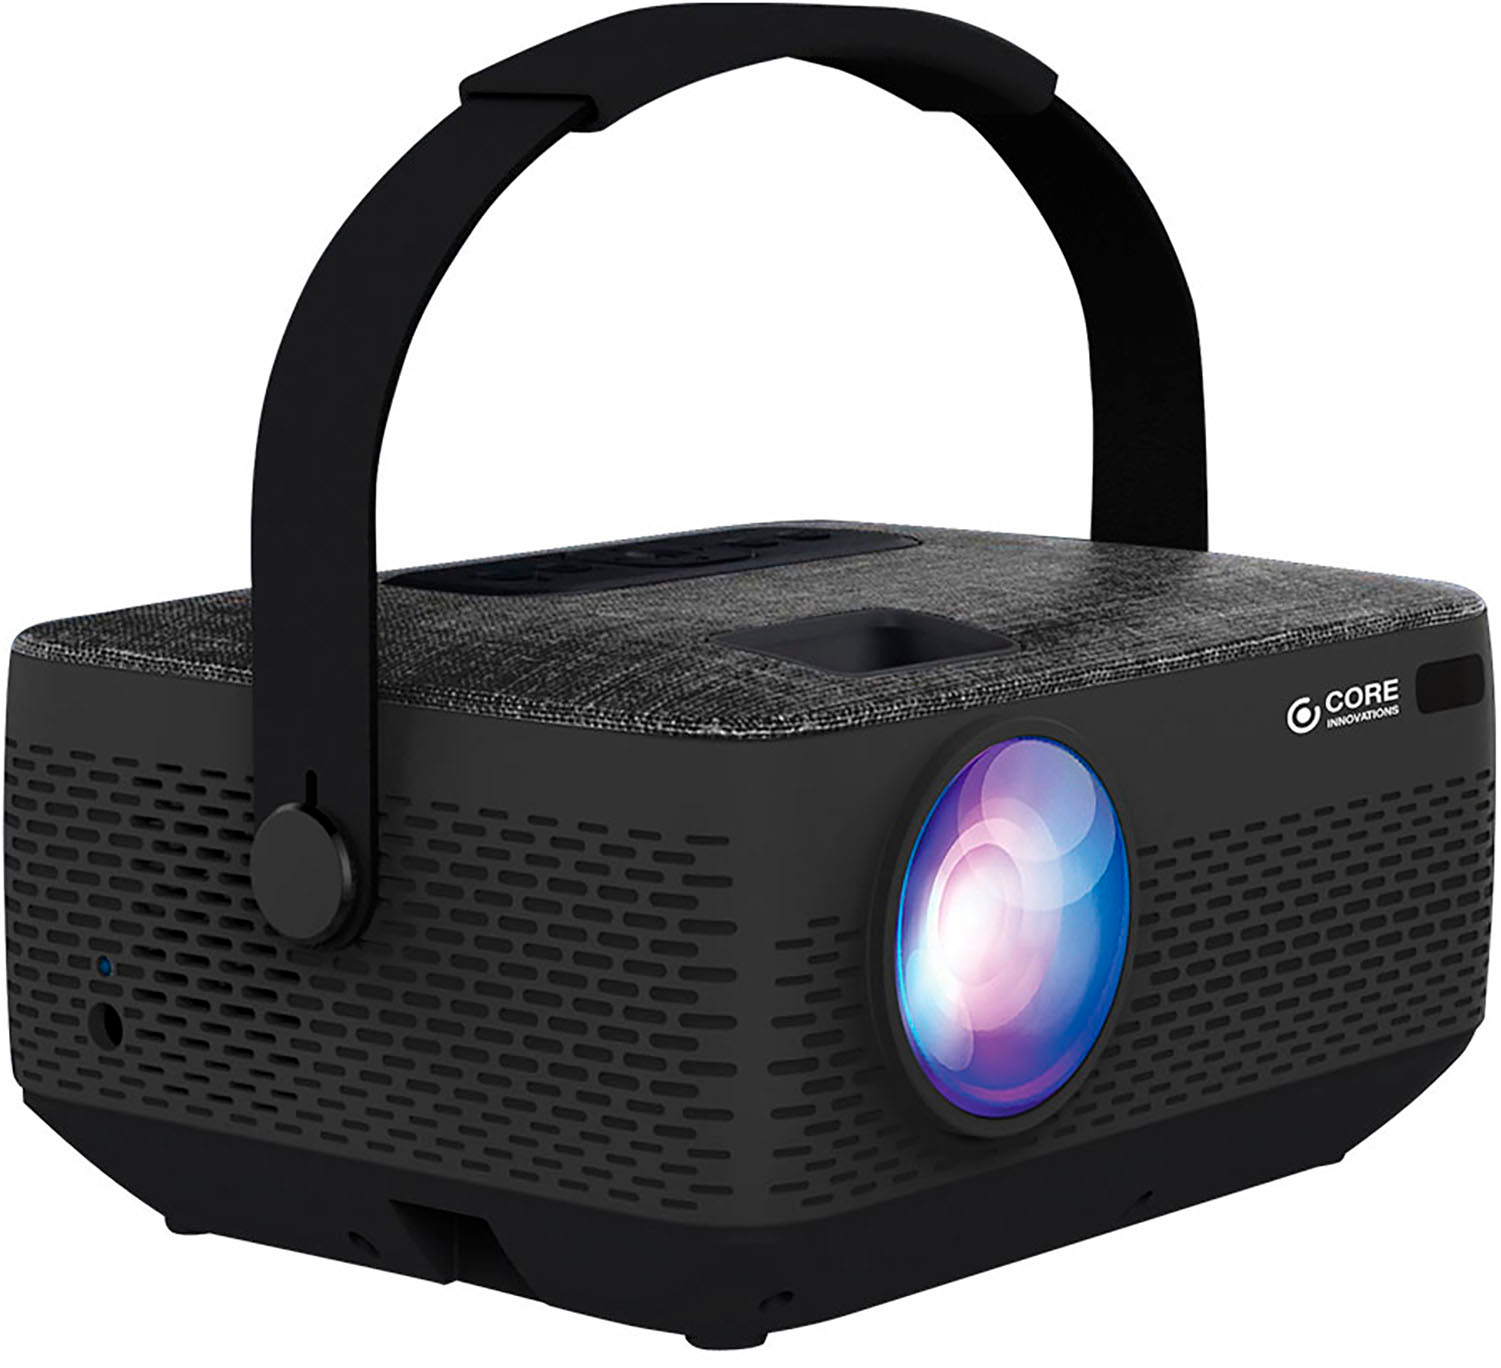  Portable 4K Projector - Home Theater Experience